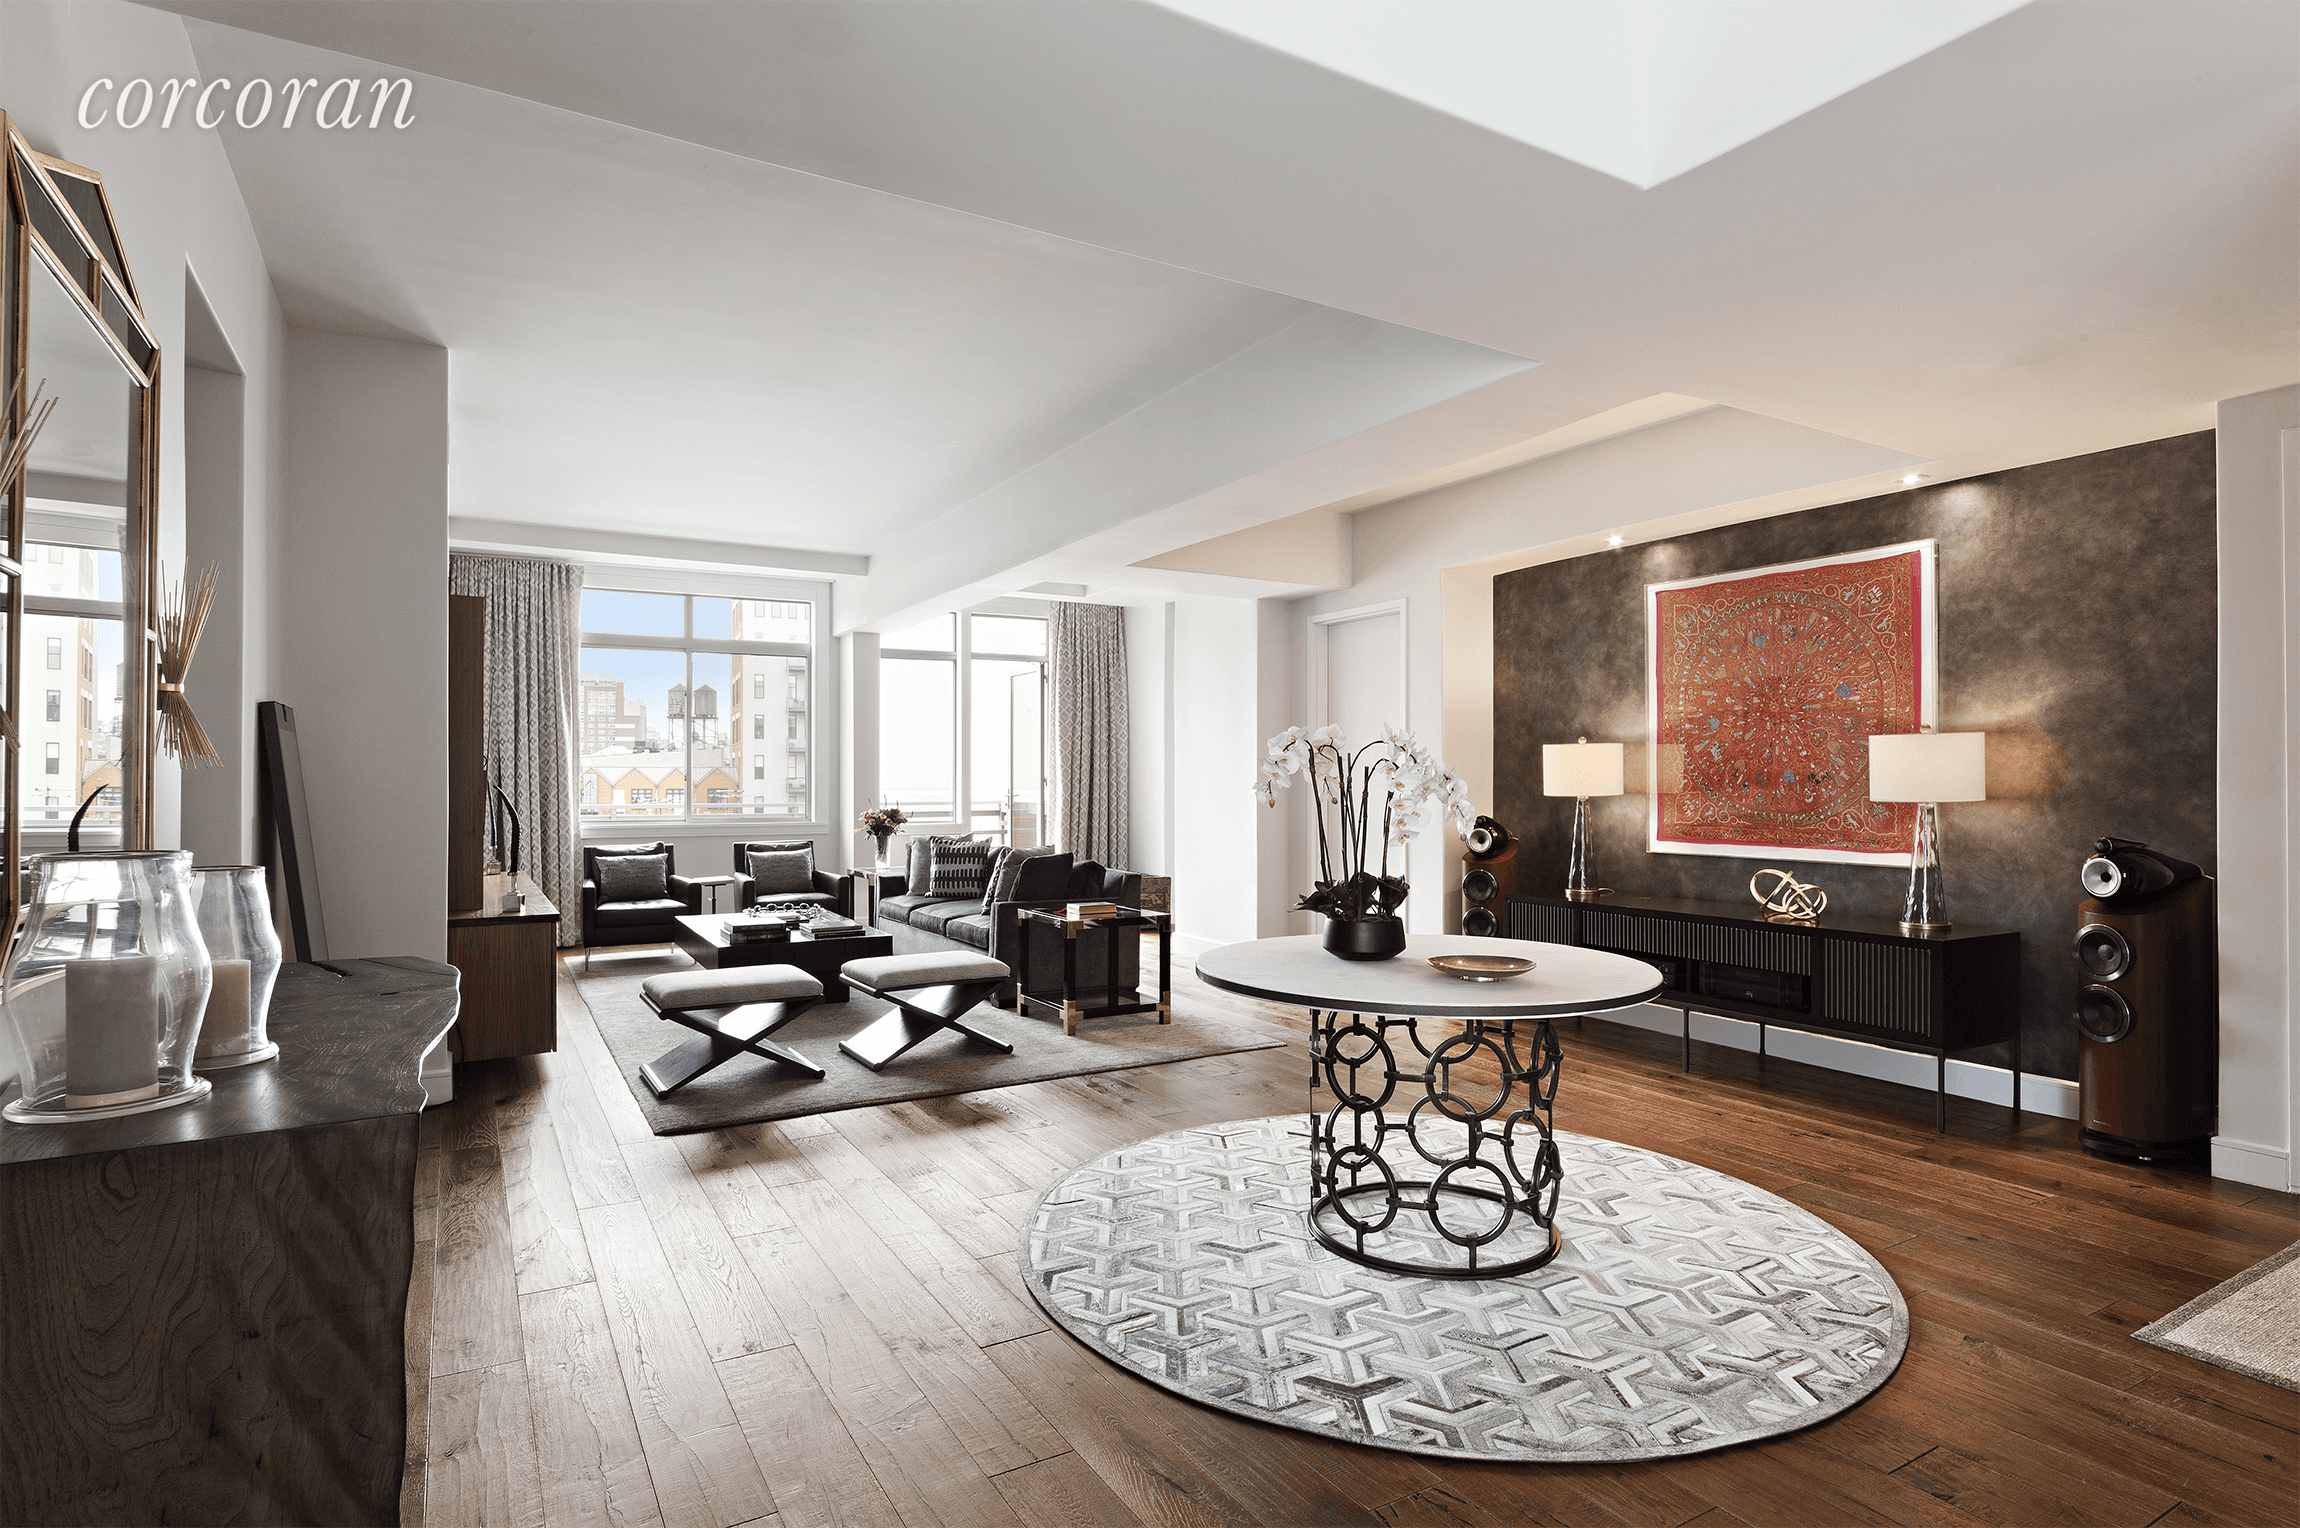 Nestled in the crossroads of SoHo, Nolita, and Tribeca, enjoy effortless convenience in this sprawling three bedroom, three and a half bathroom penthouse with private outdoor space.